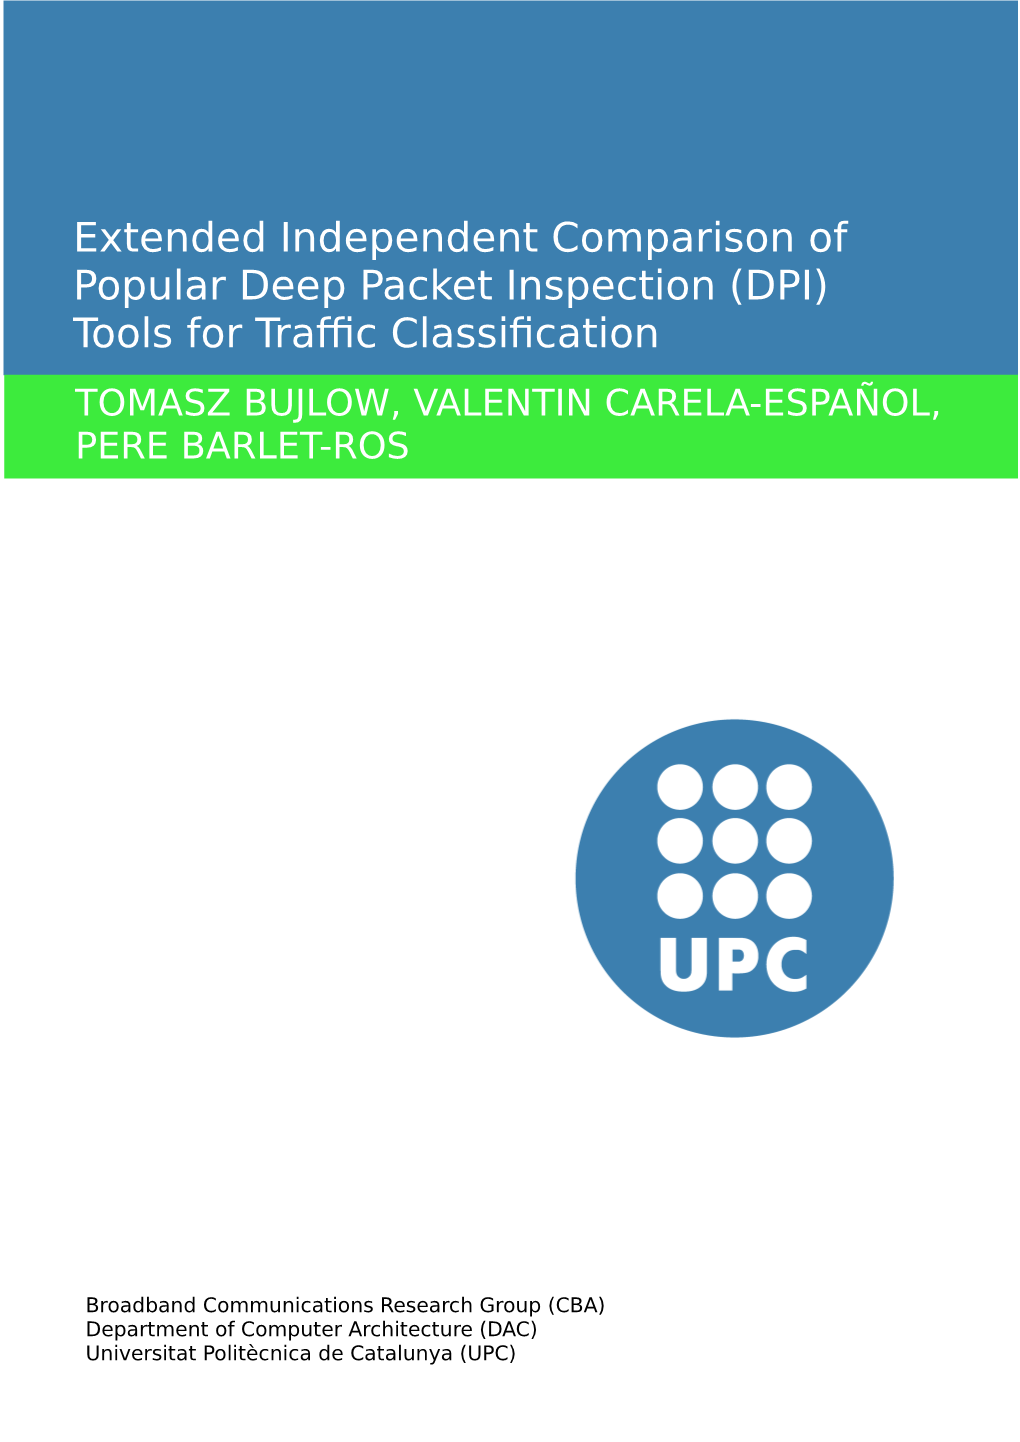 Extended Independent Comparison of Popular Deep Packet Inspection (DPI) Tools for Traffic Classification TOMASZ BUJLOW, VALENTIN CARELA-ESPAÑOL, PERE BARLET-ROS